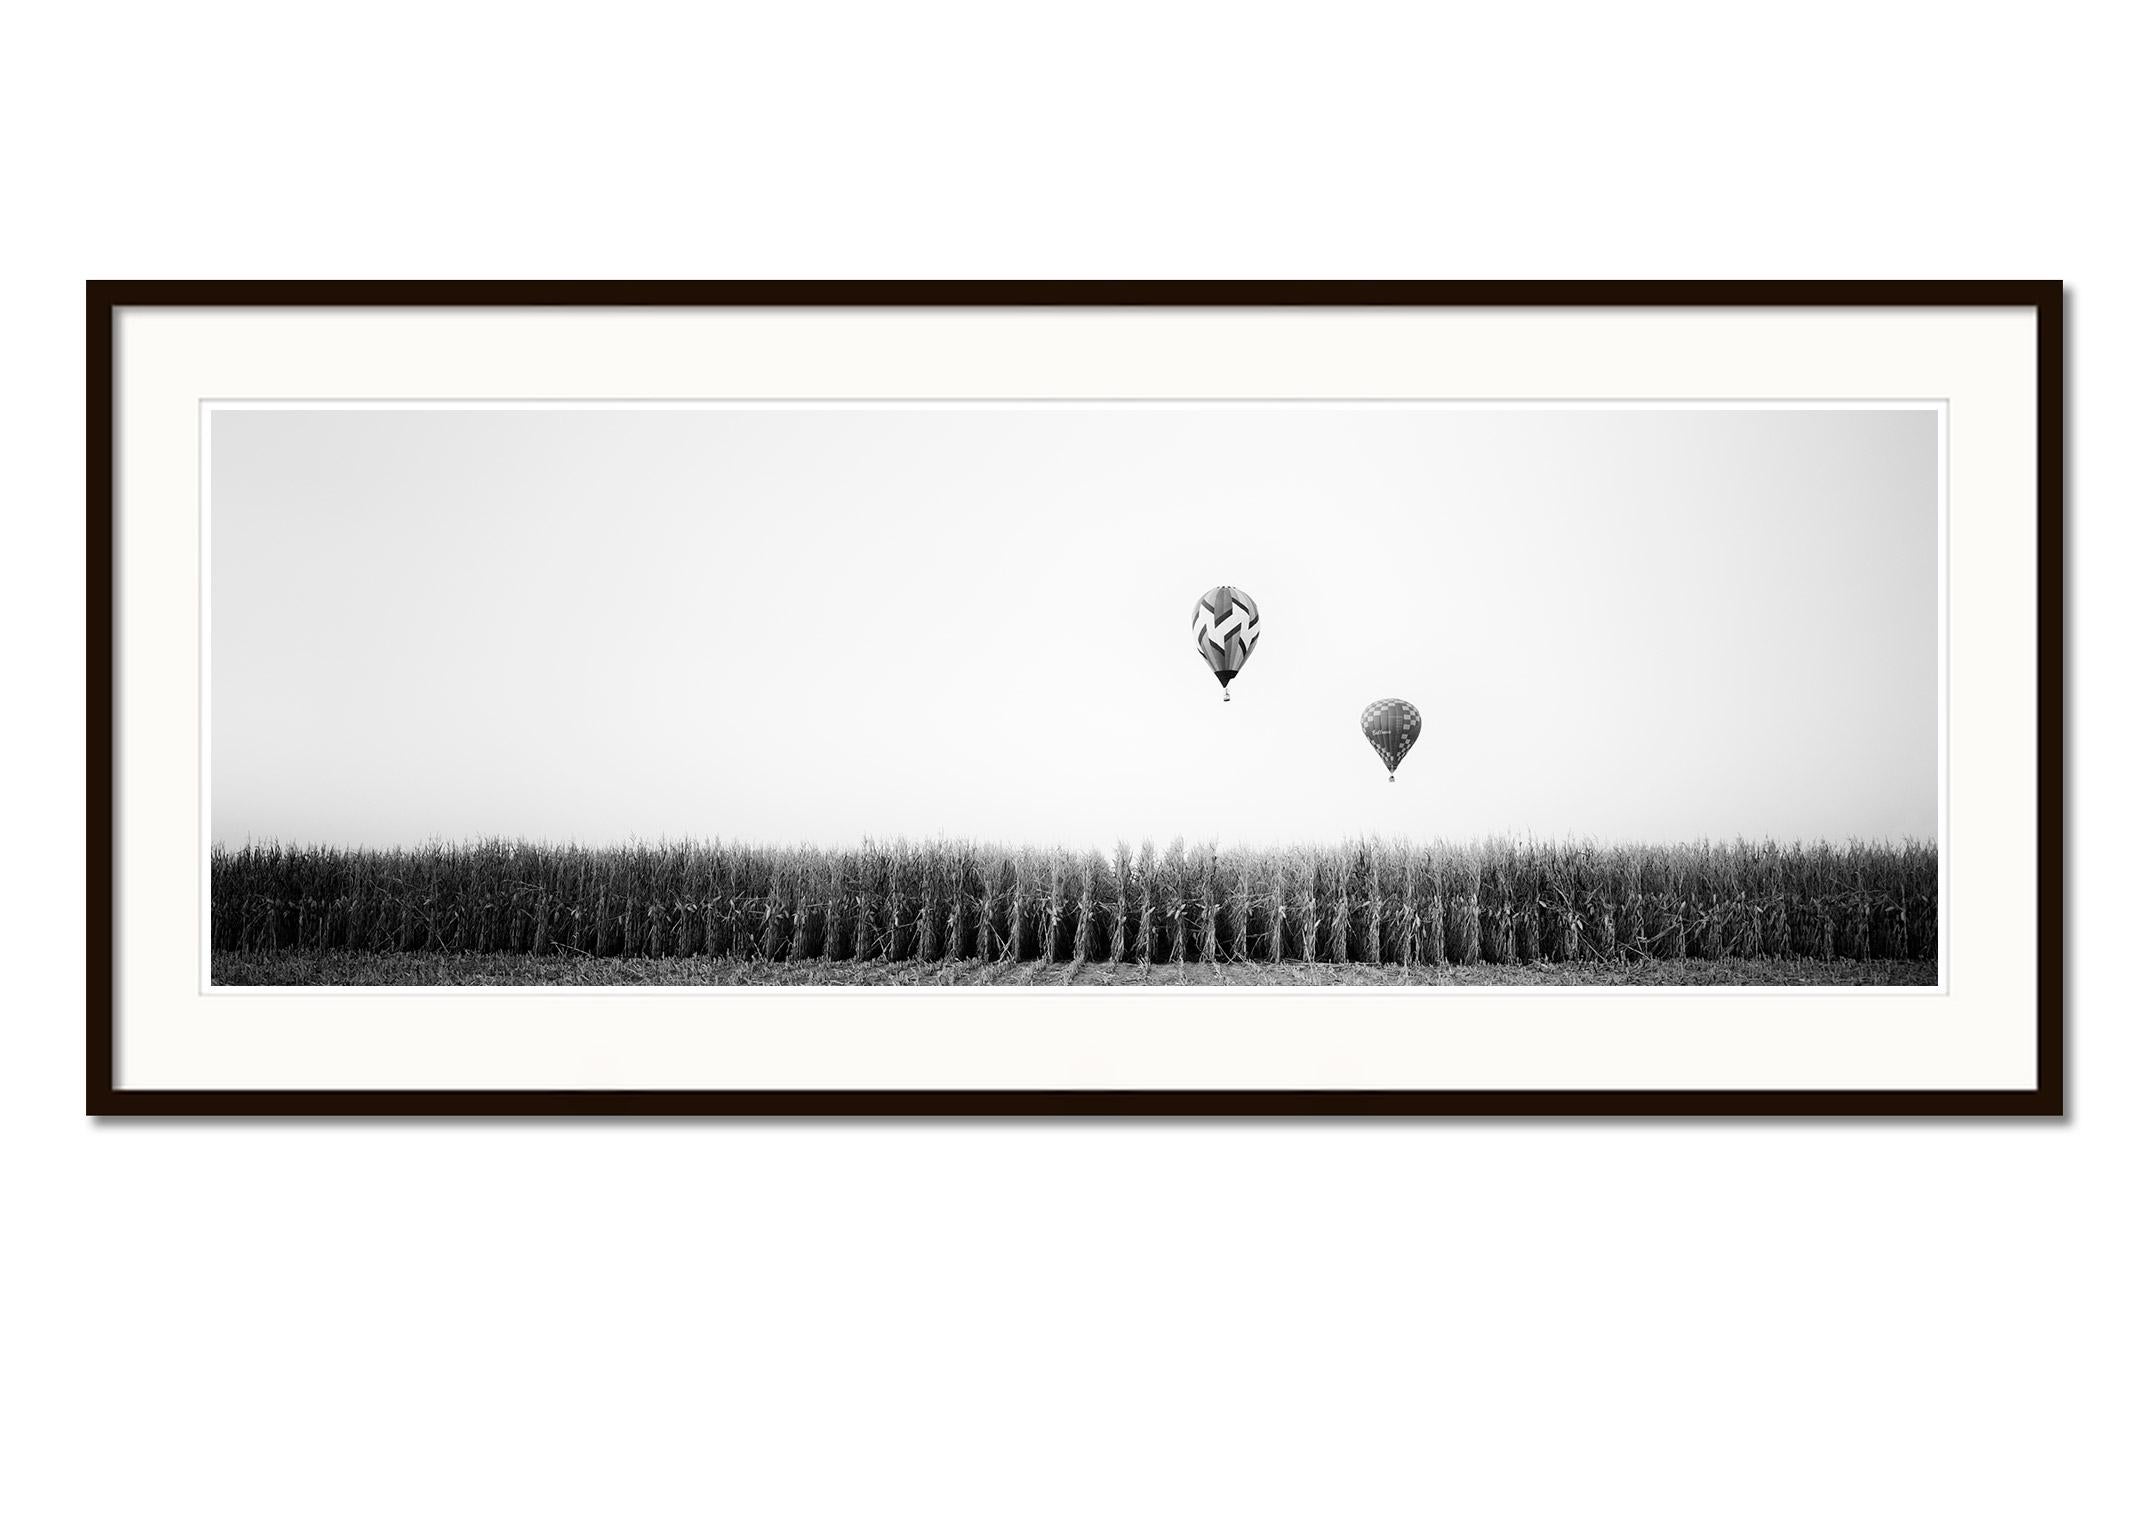 Hot Air Balloon Panorama, Cornfield, black and white, art landscape, photography - Gray Landscape Photograph by Gerald Berghammer